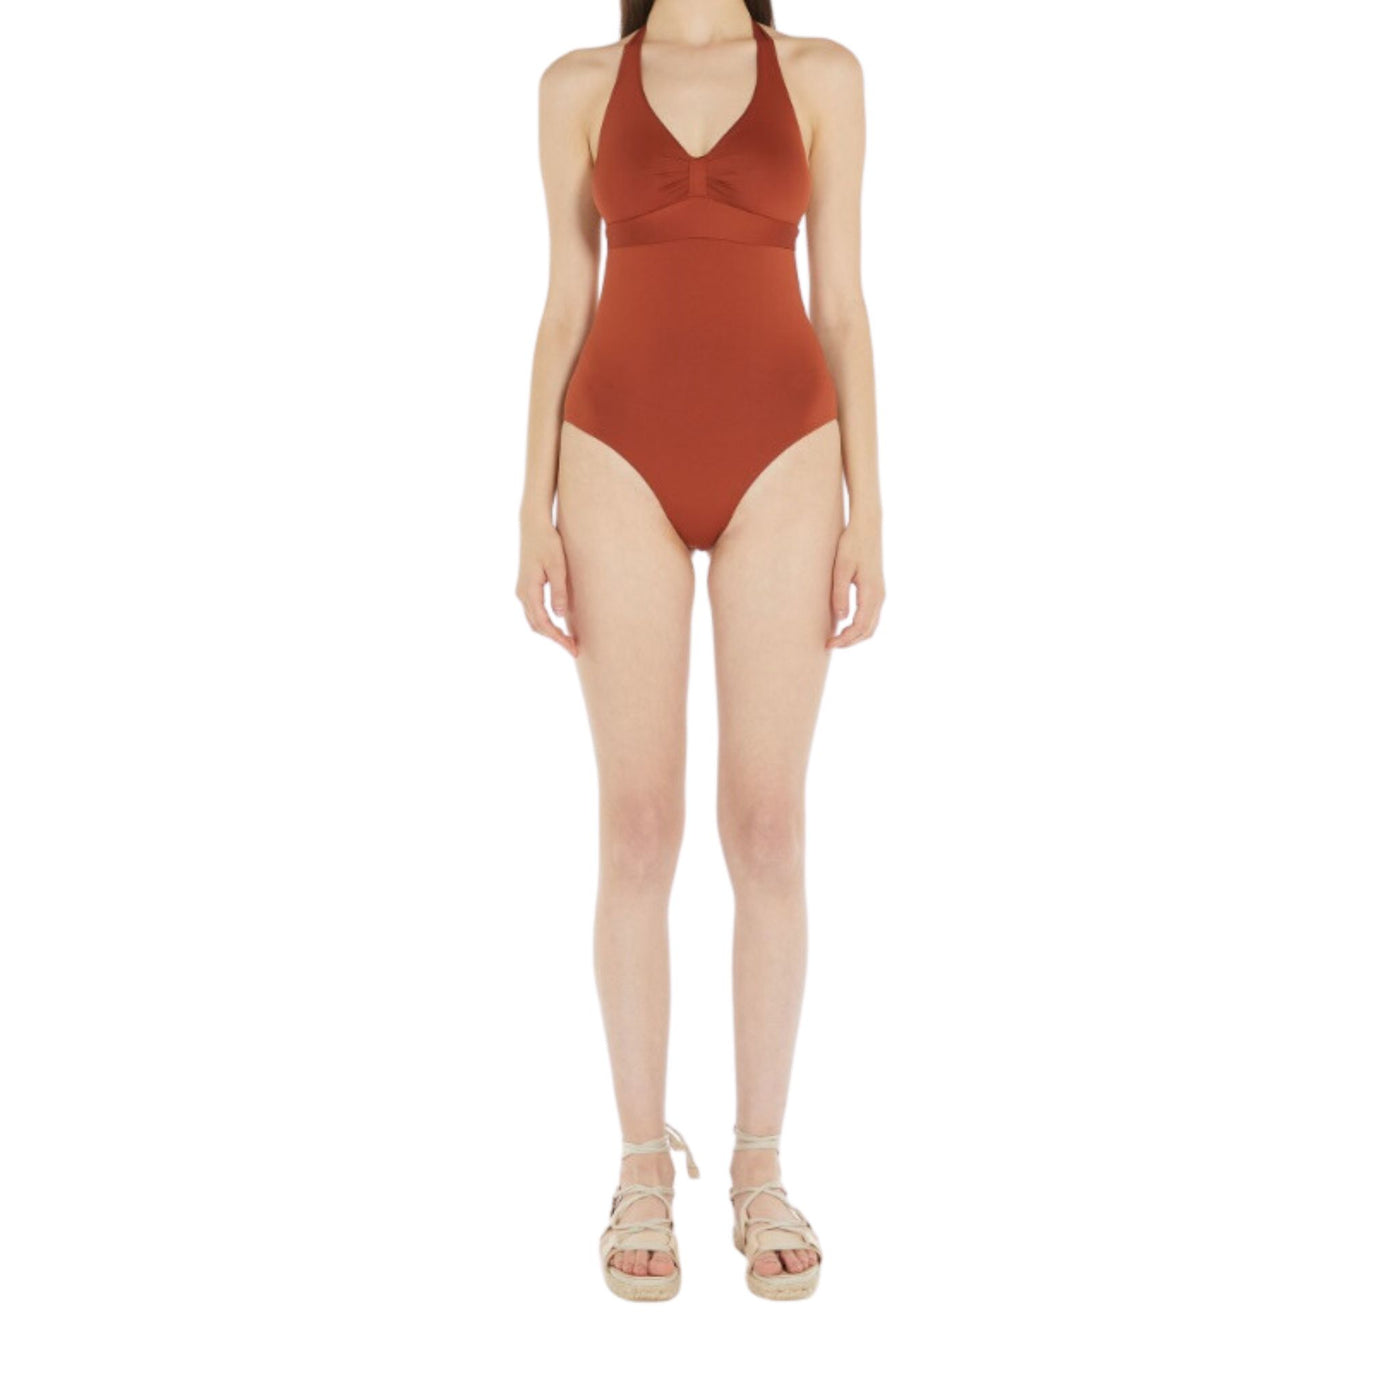 Women's swimsuit with curled motif